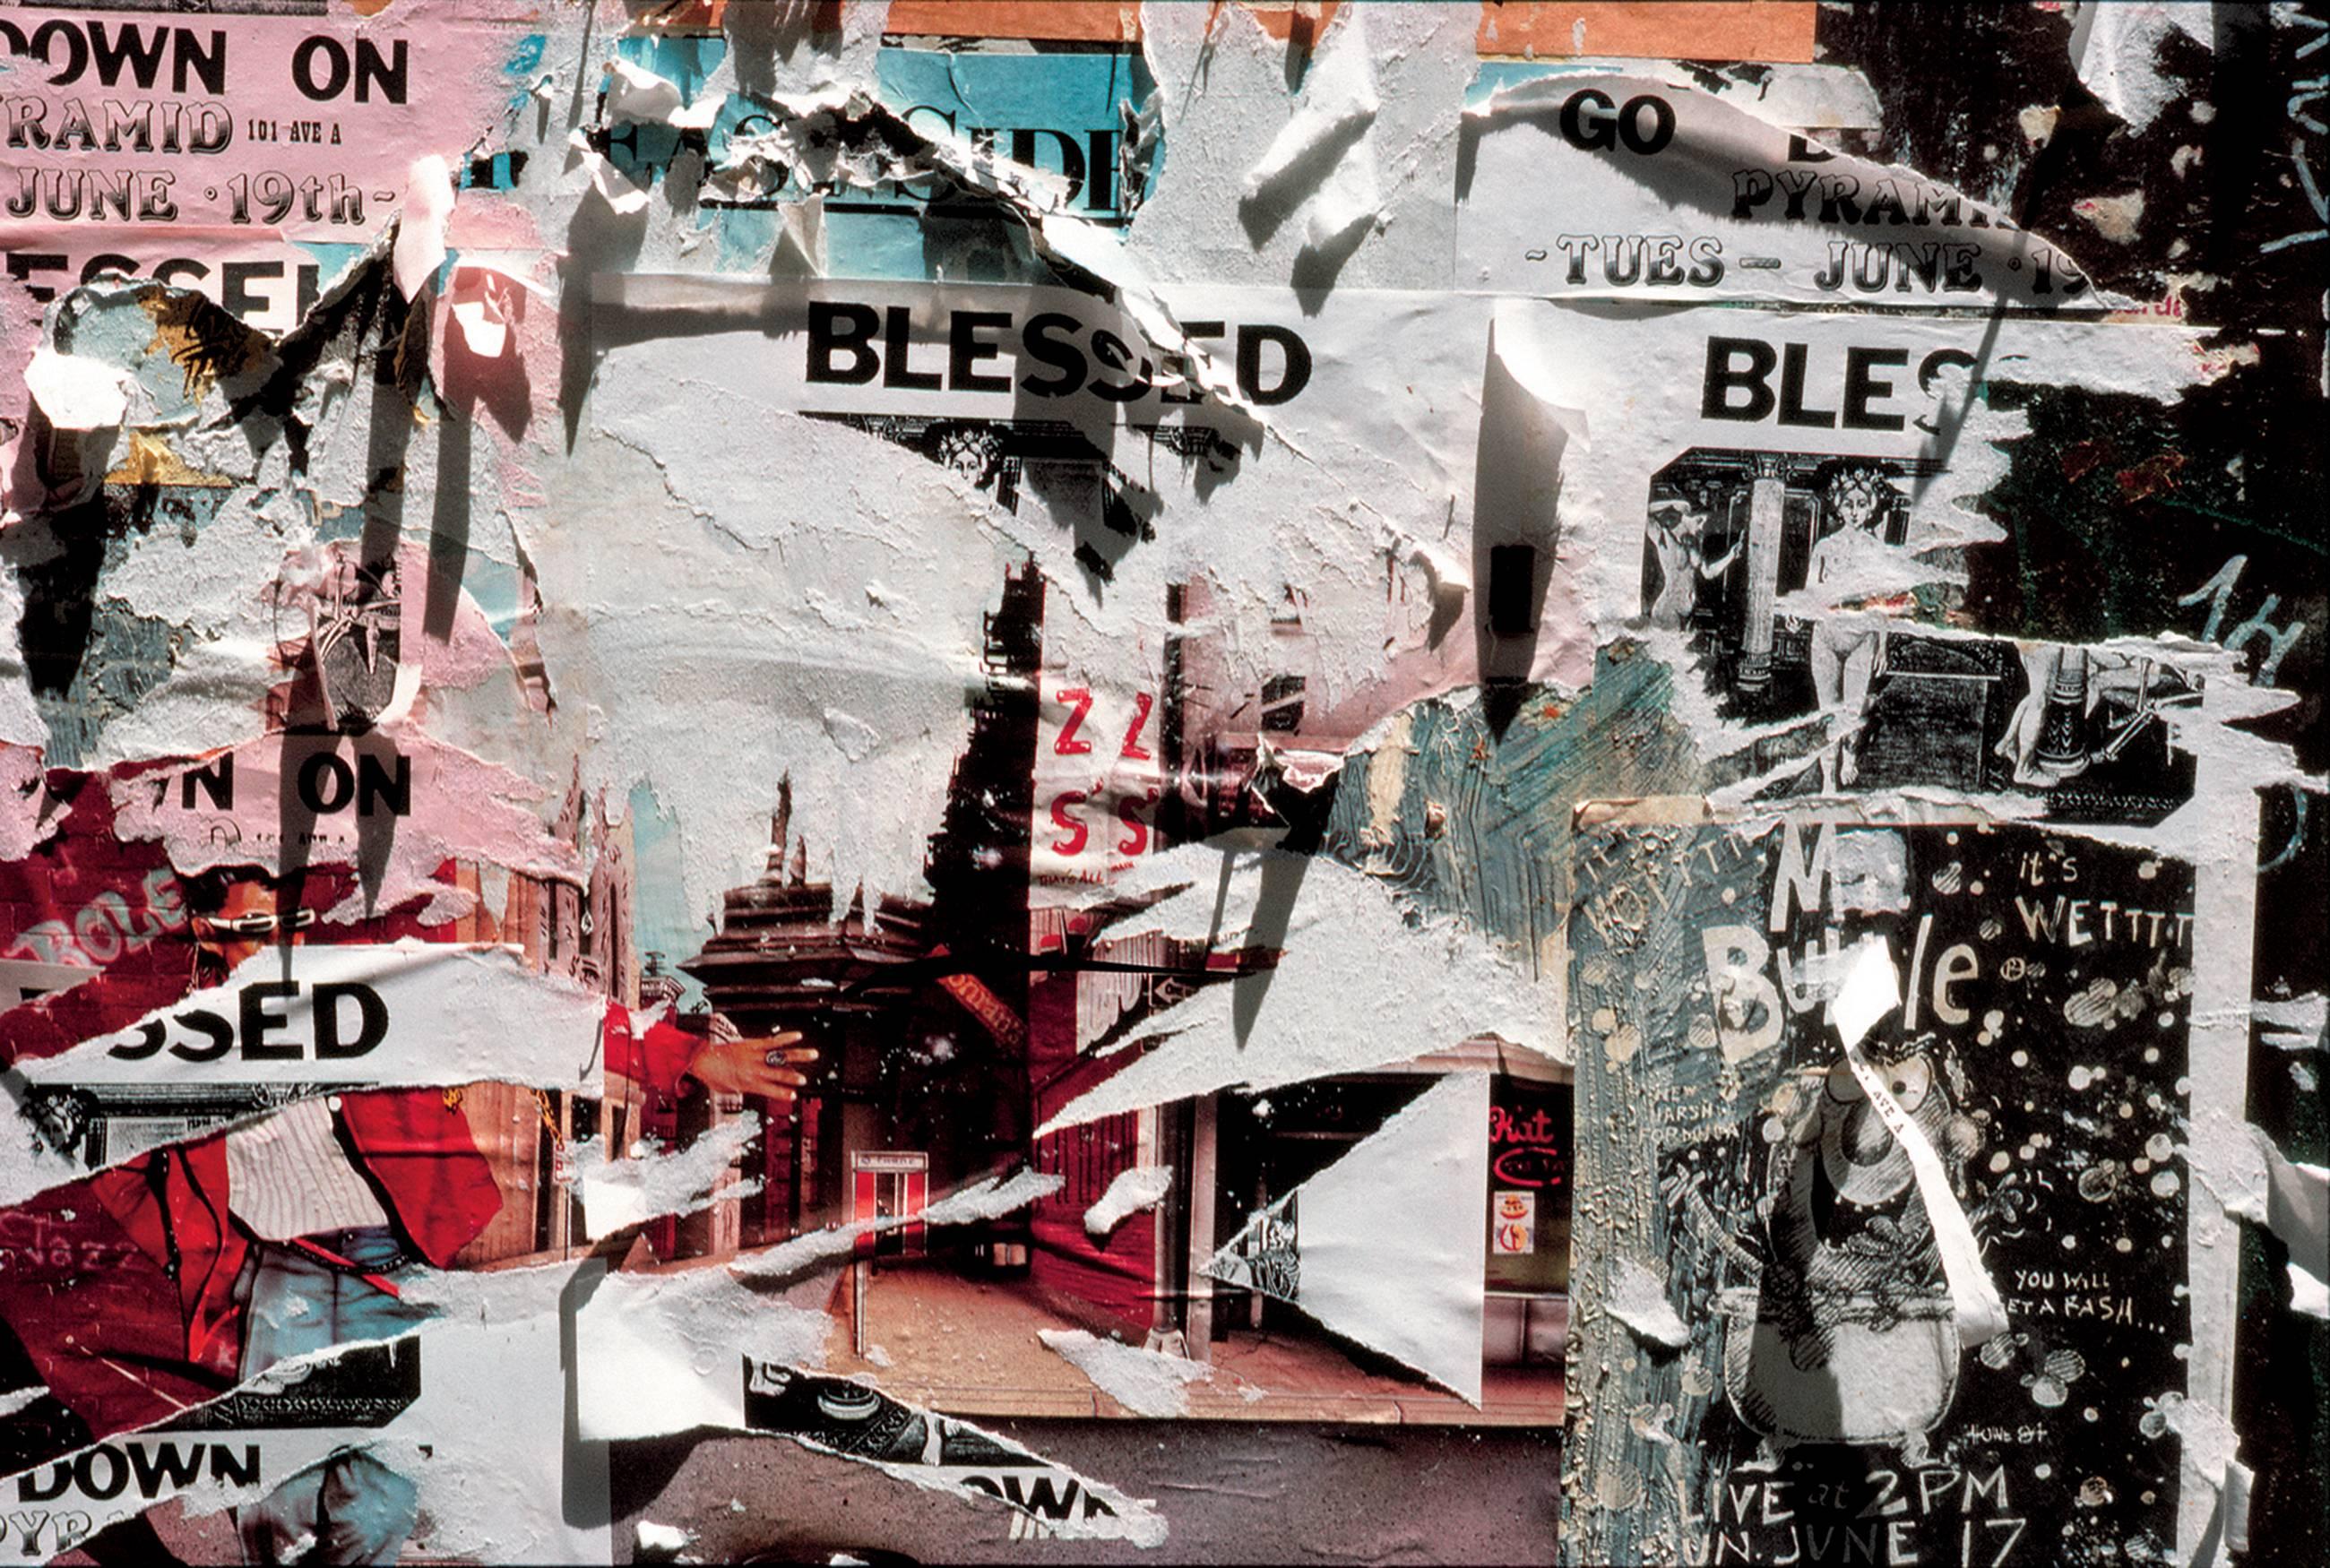 Robert Herman Color Photograph - 'Blessed' Soho New York 1981 photograph (The New Yorkers) 